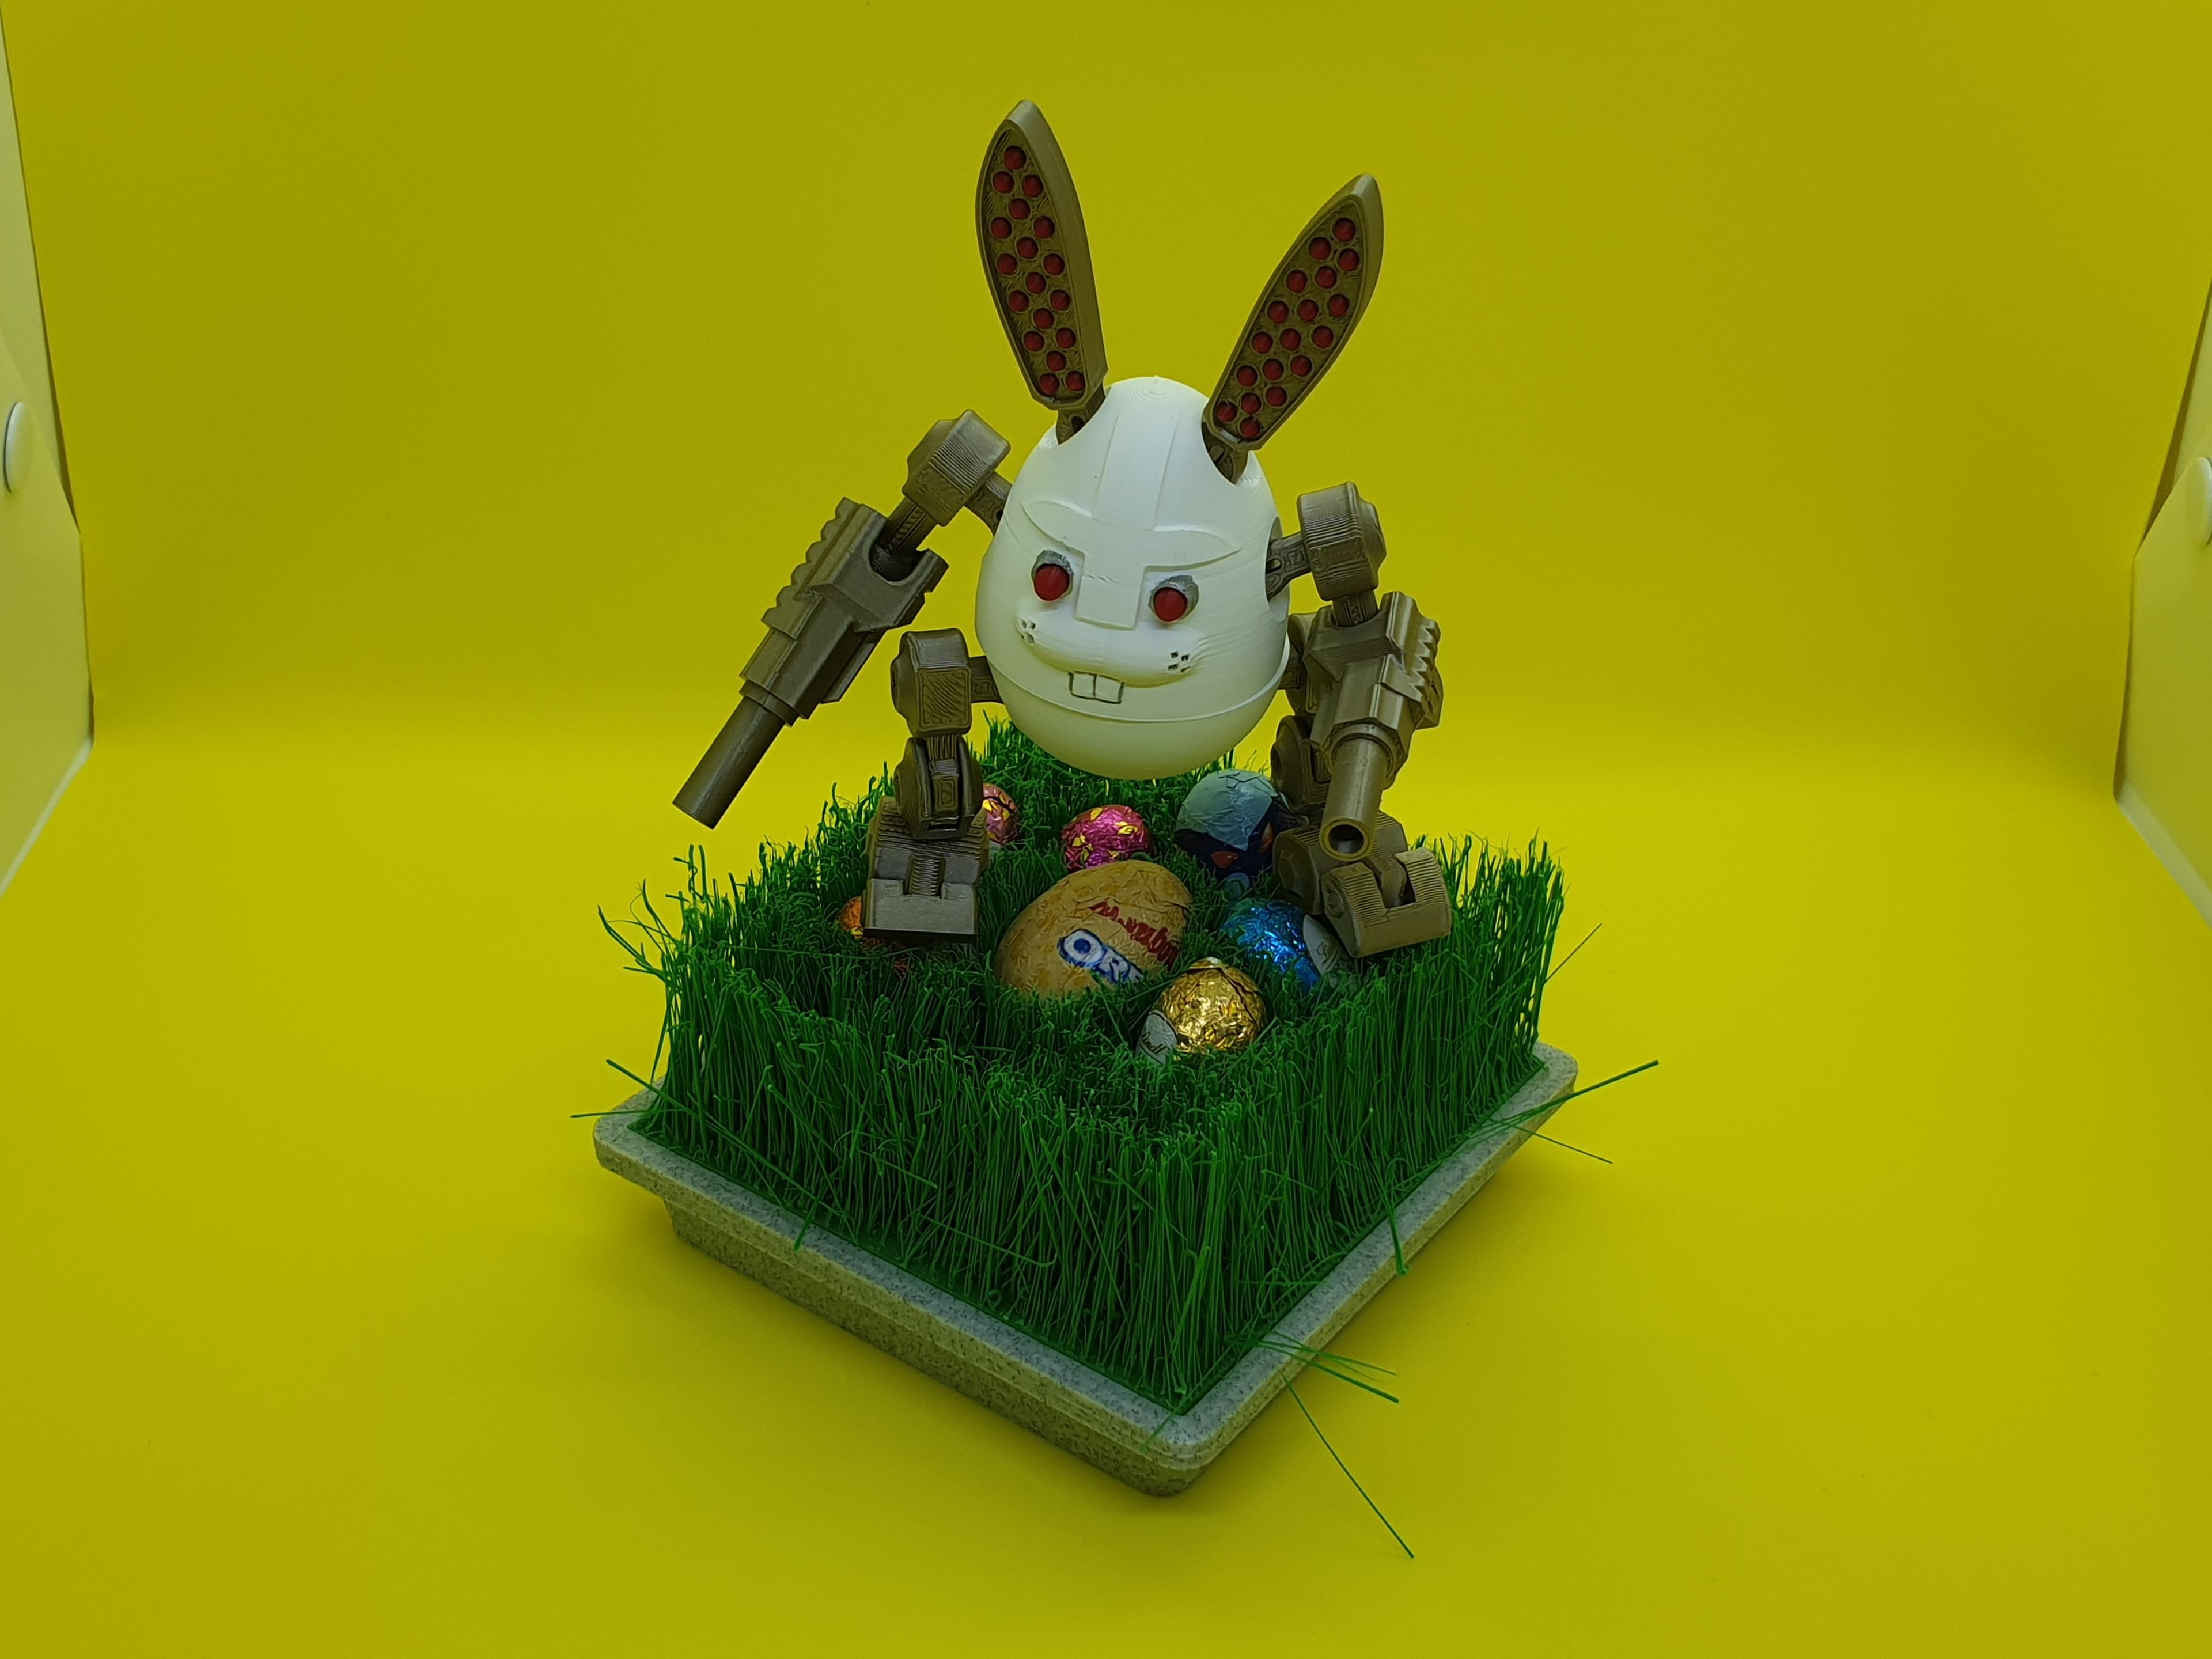 3GG-8UNNY articulated autonomous light Easter combat bot guarding some chocolate eggs